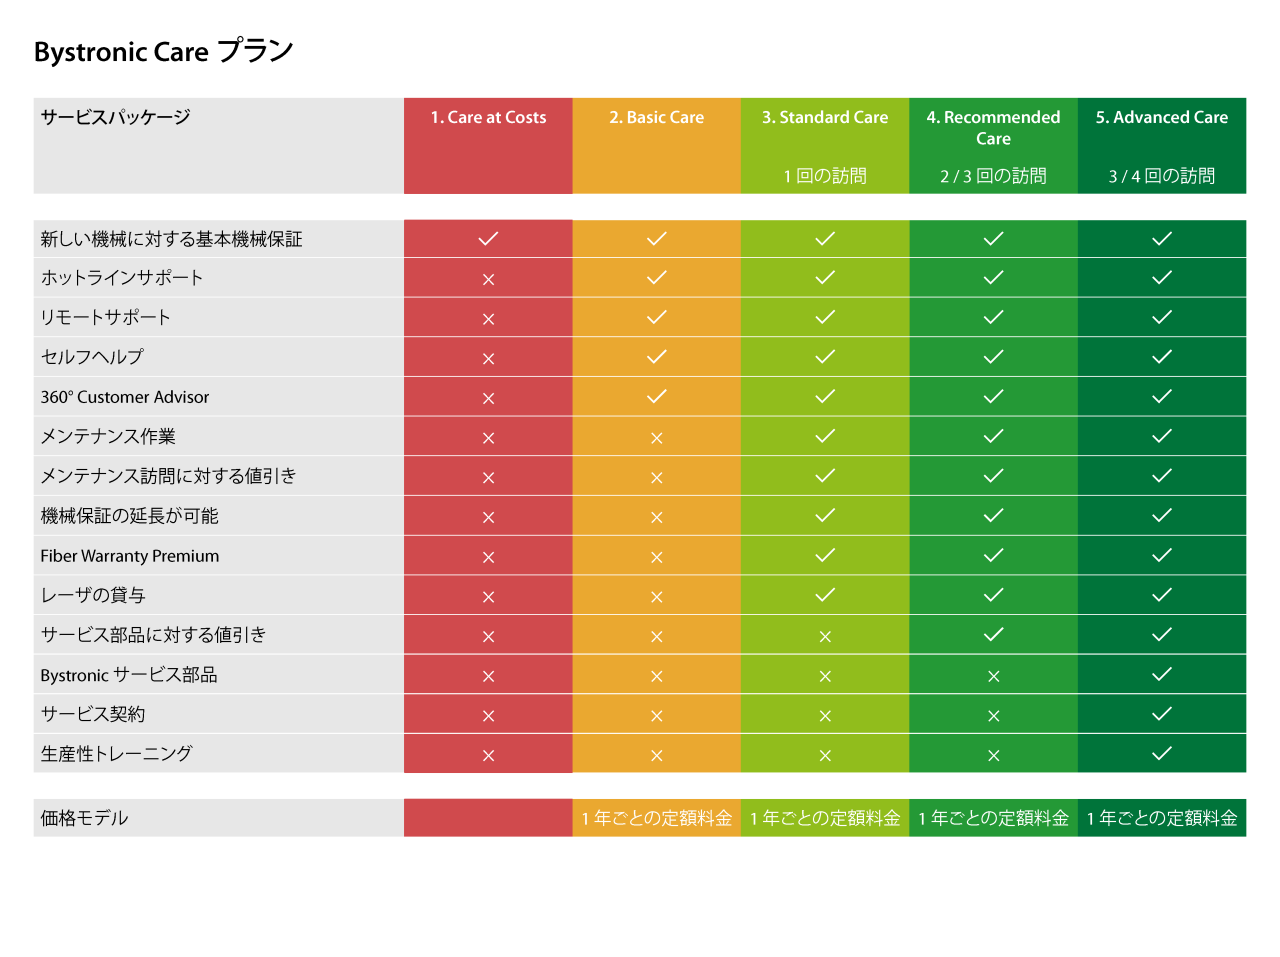 Bystronic Care Overview - Japanese